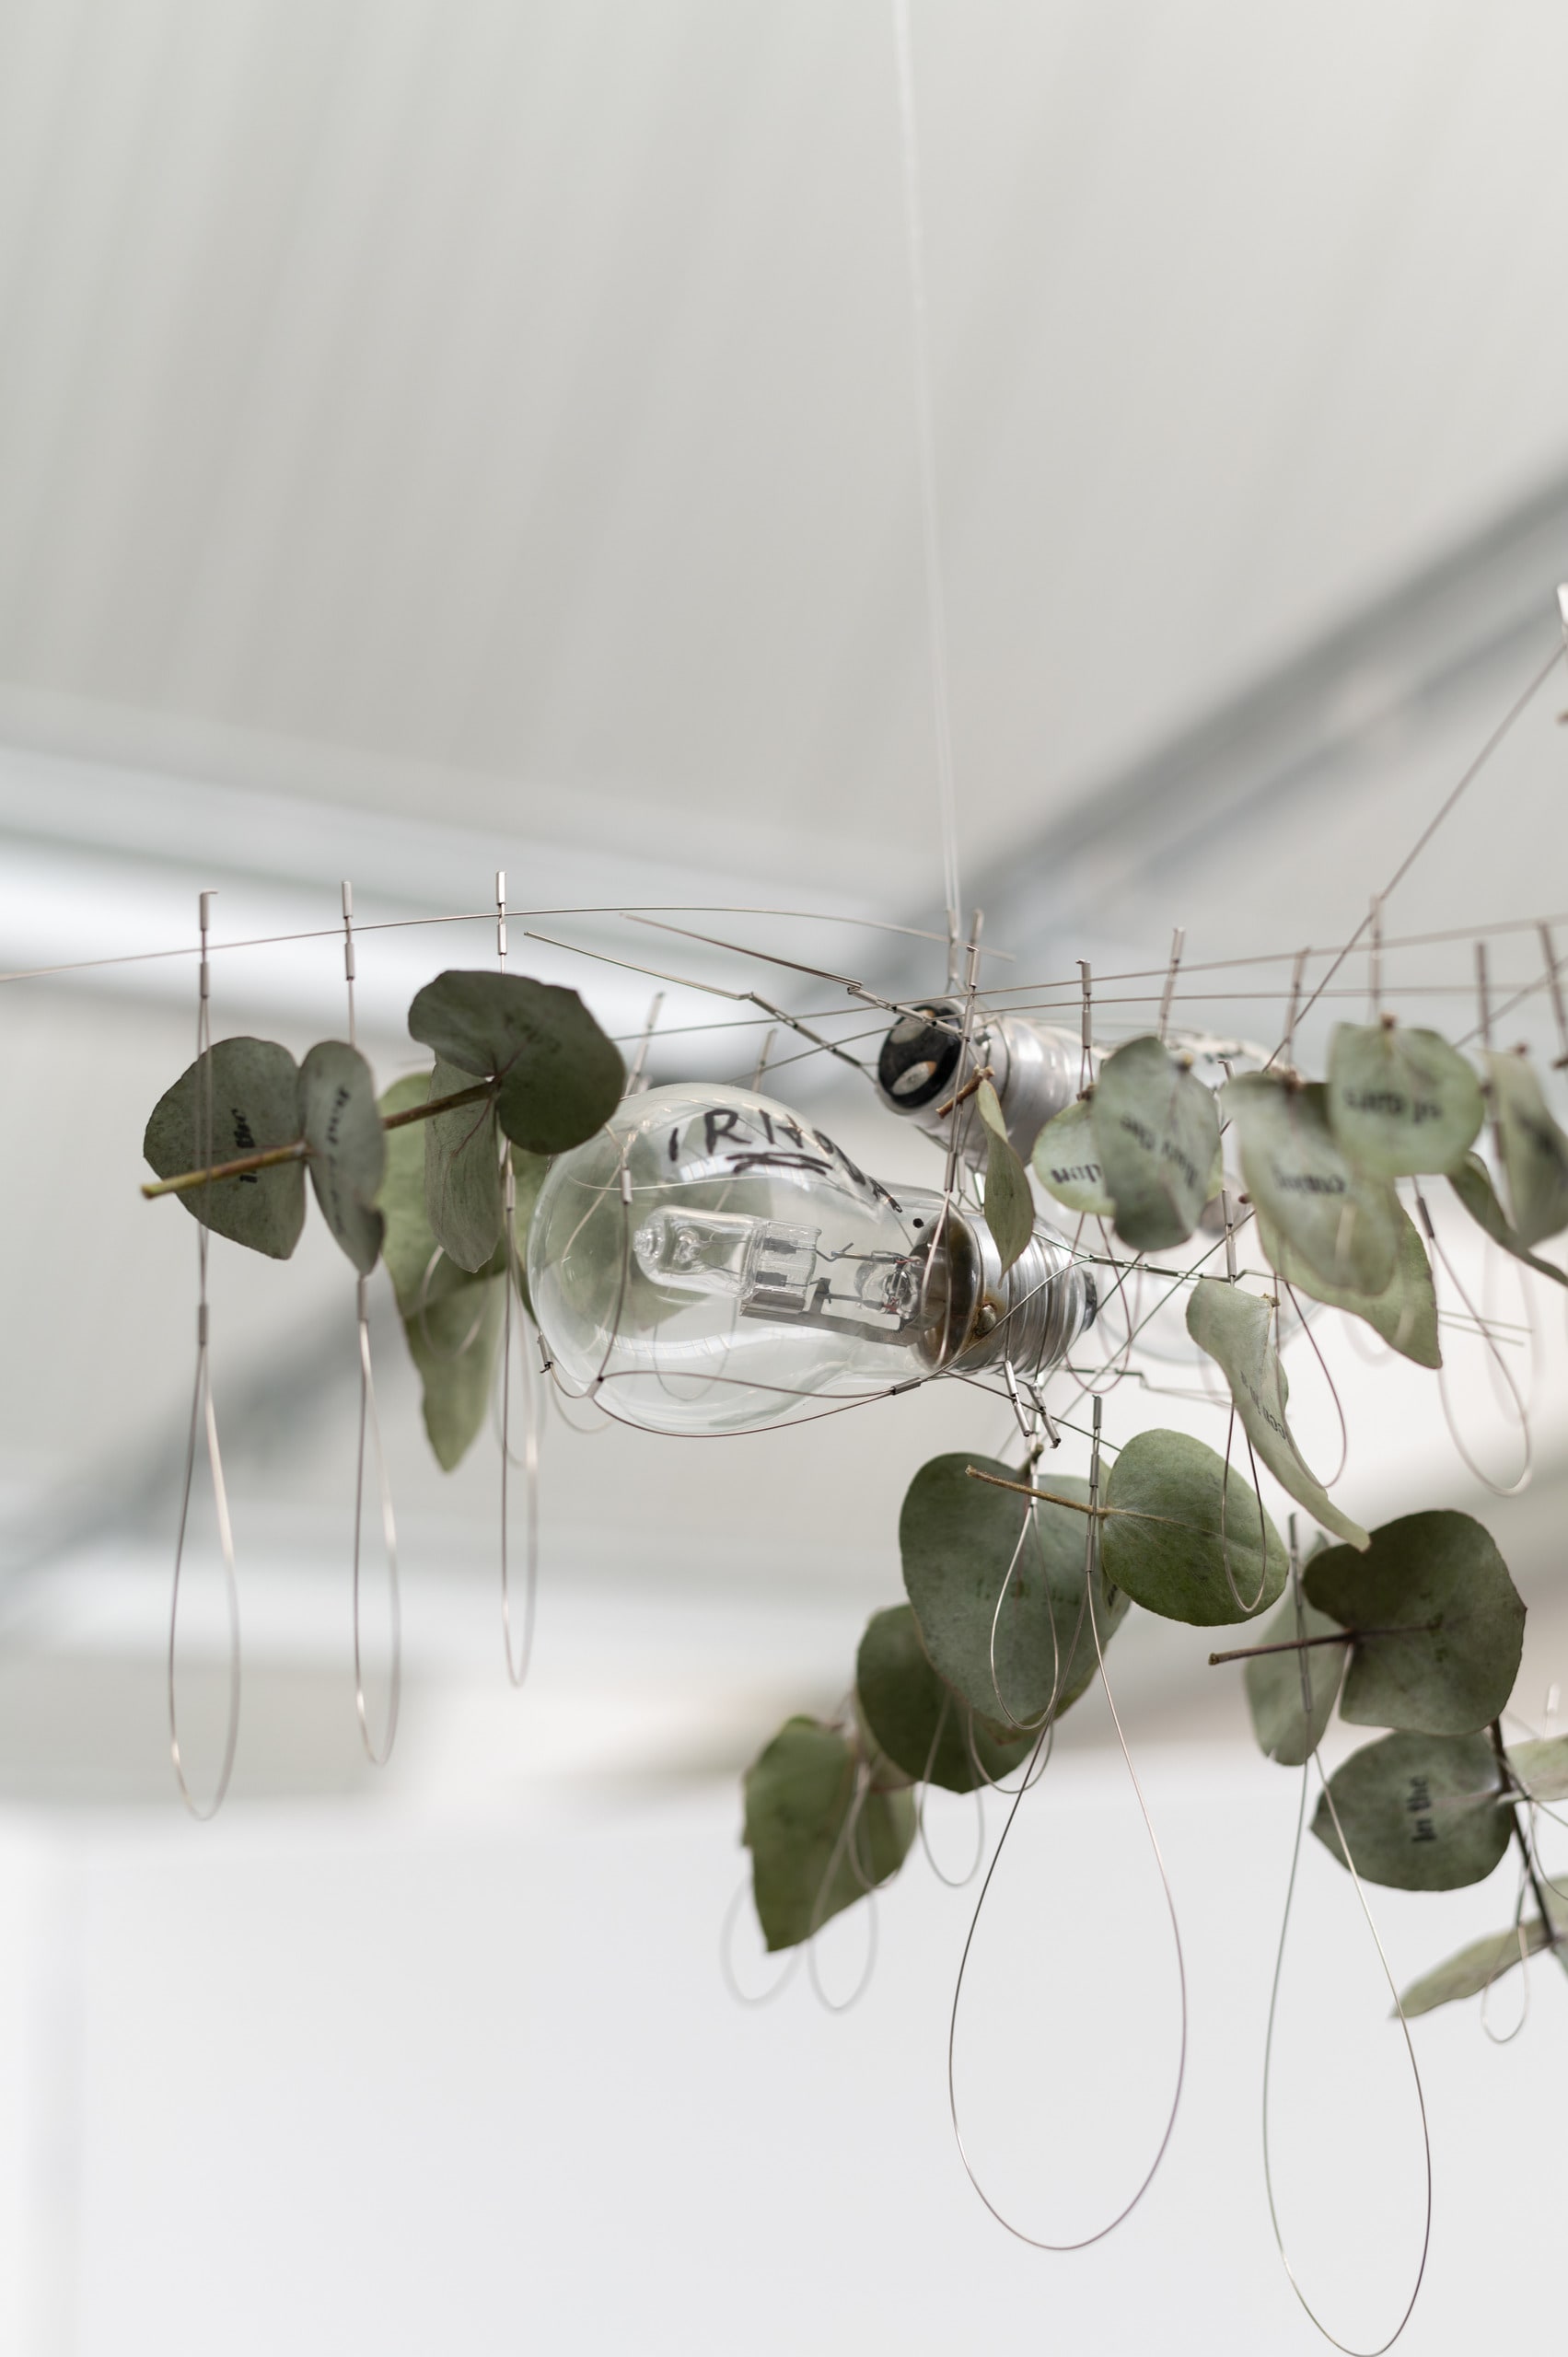 'Like a blade seen in a dream’, Light bulb, stainless steel wire/tube, eucalyptus leaves